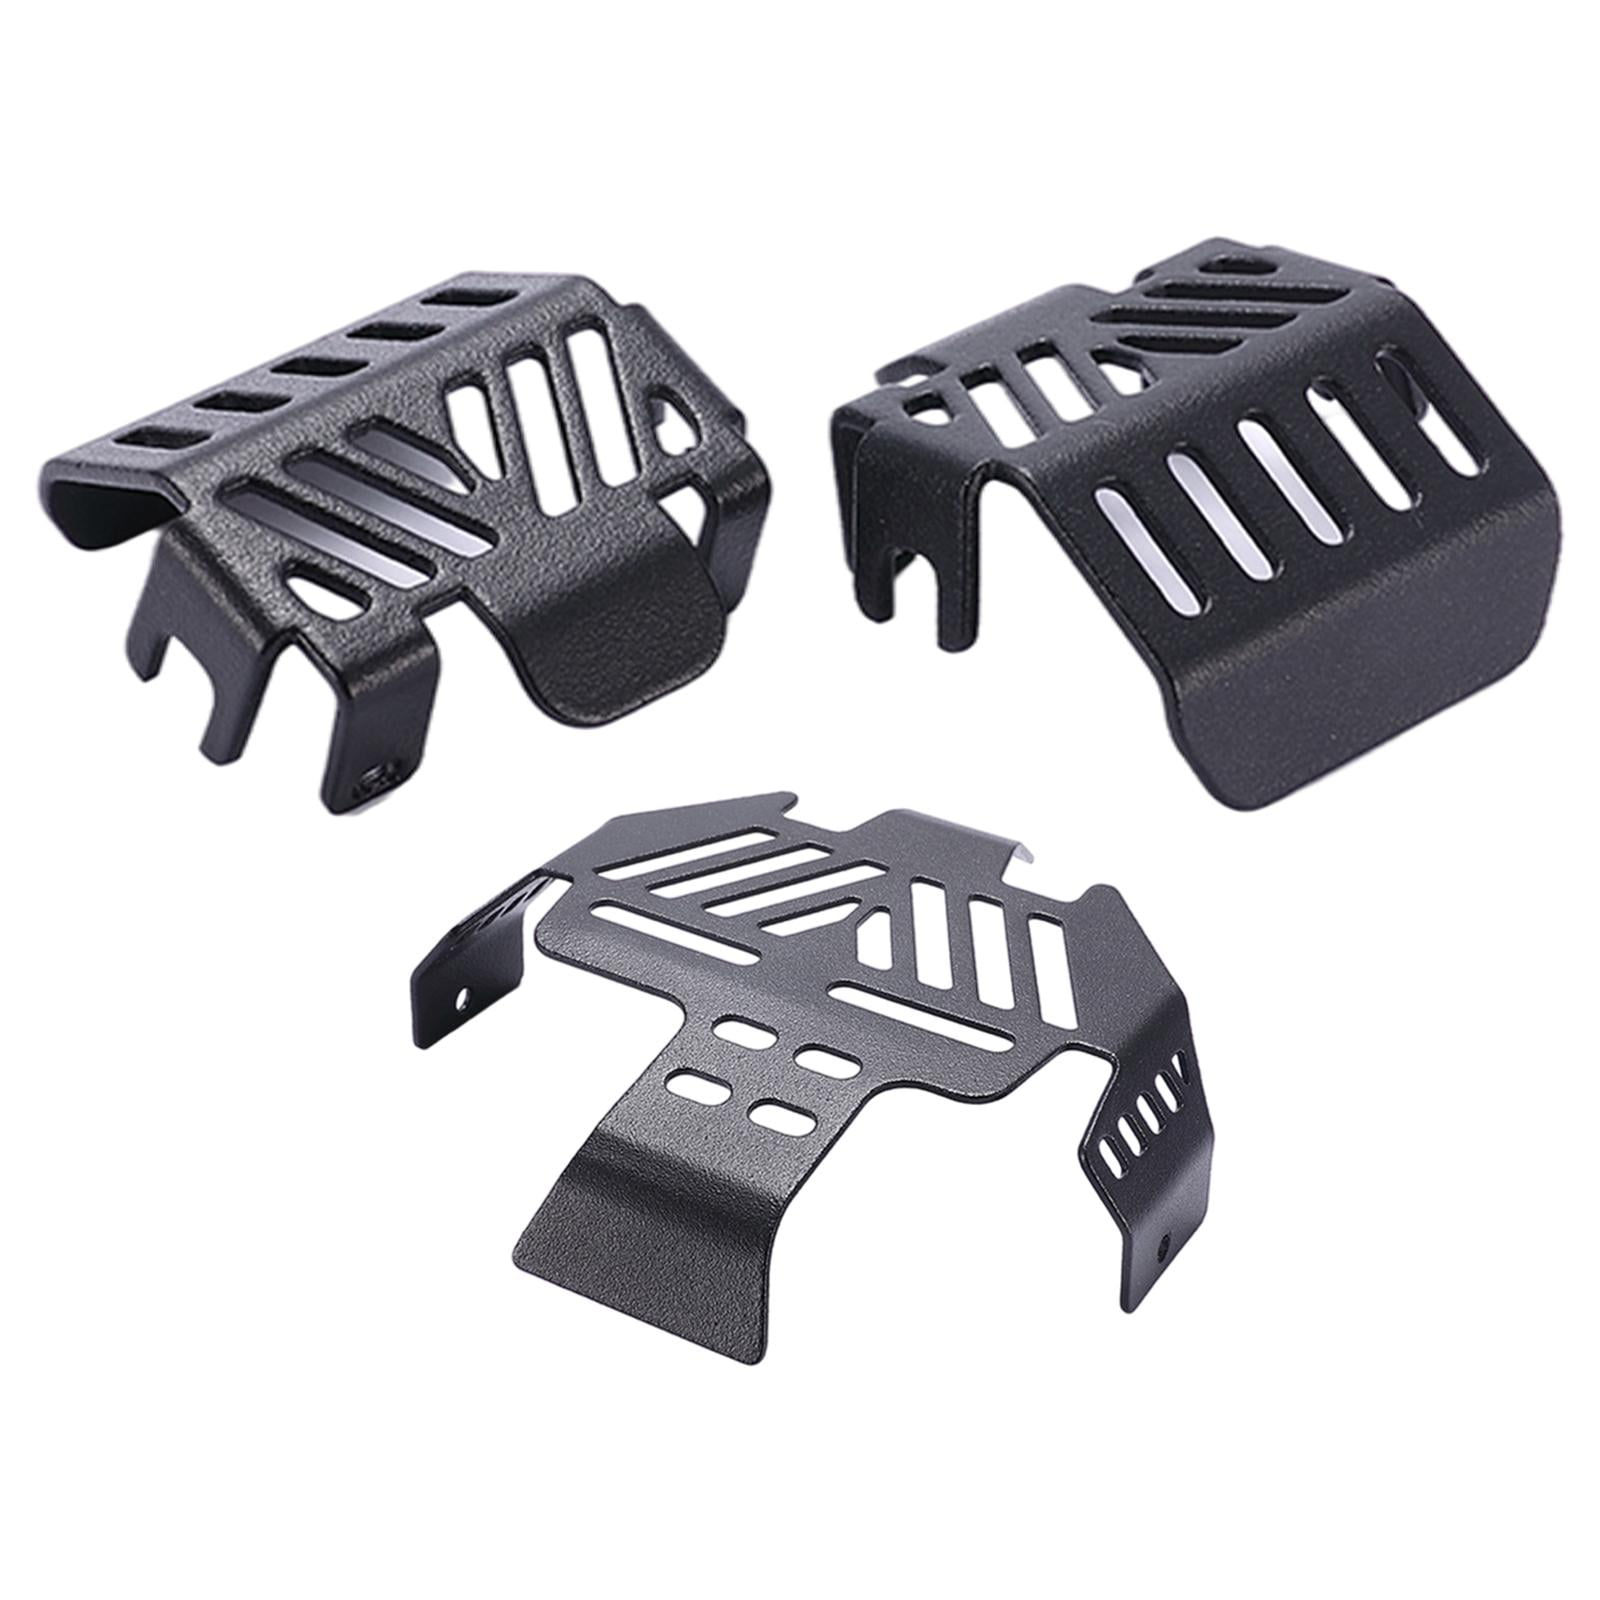 Metal Protective Plate for Axial SCX10 III AXI03007 Wrangler RC Car Accessories 